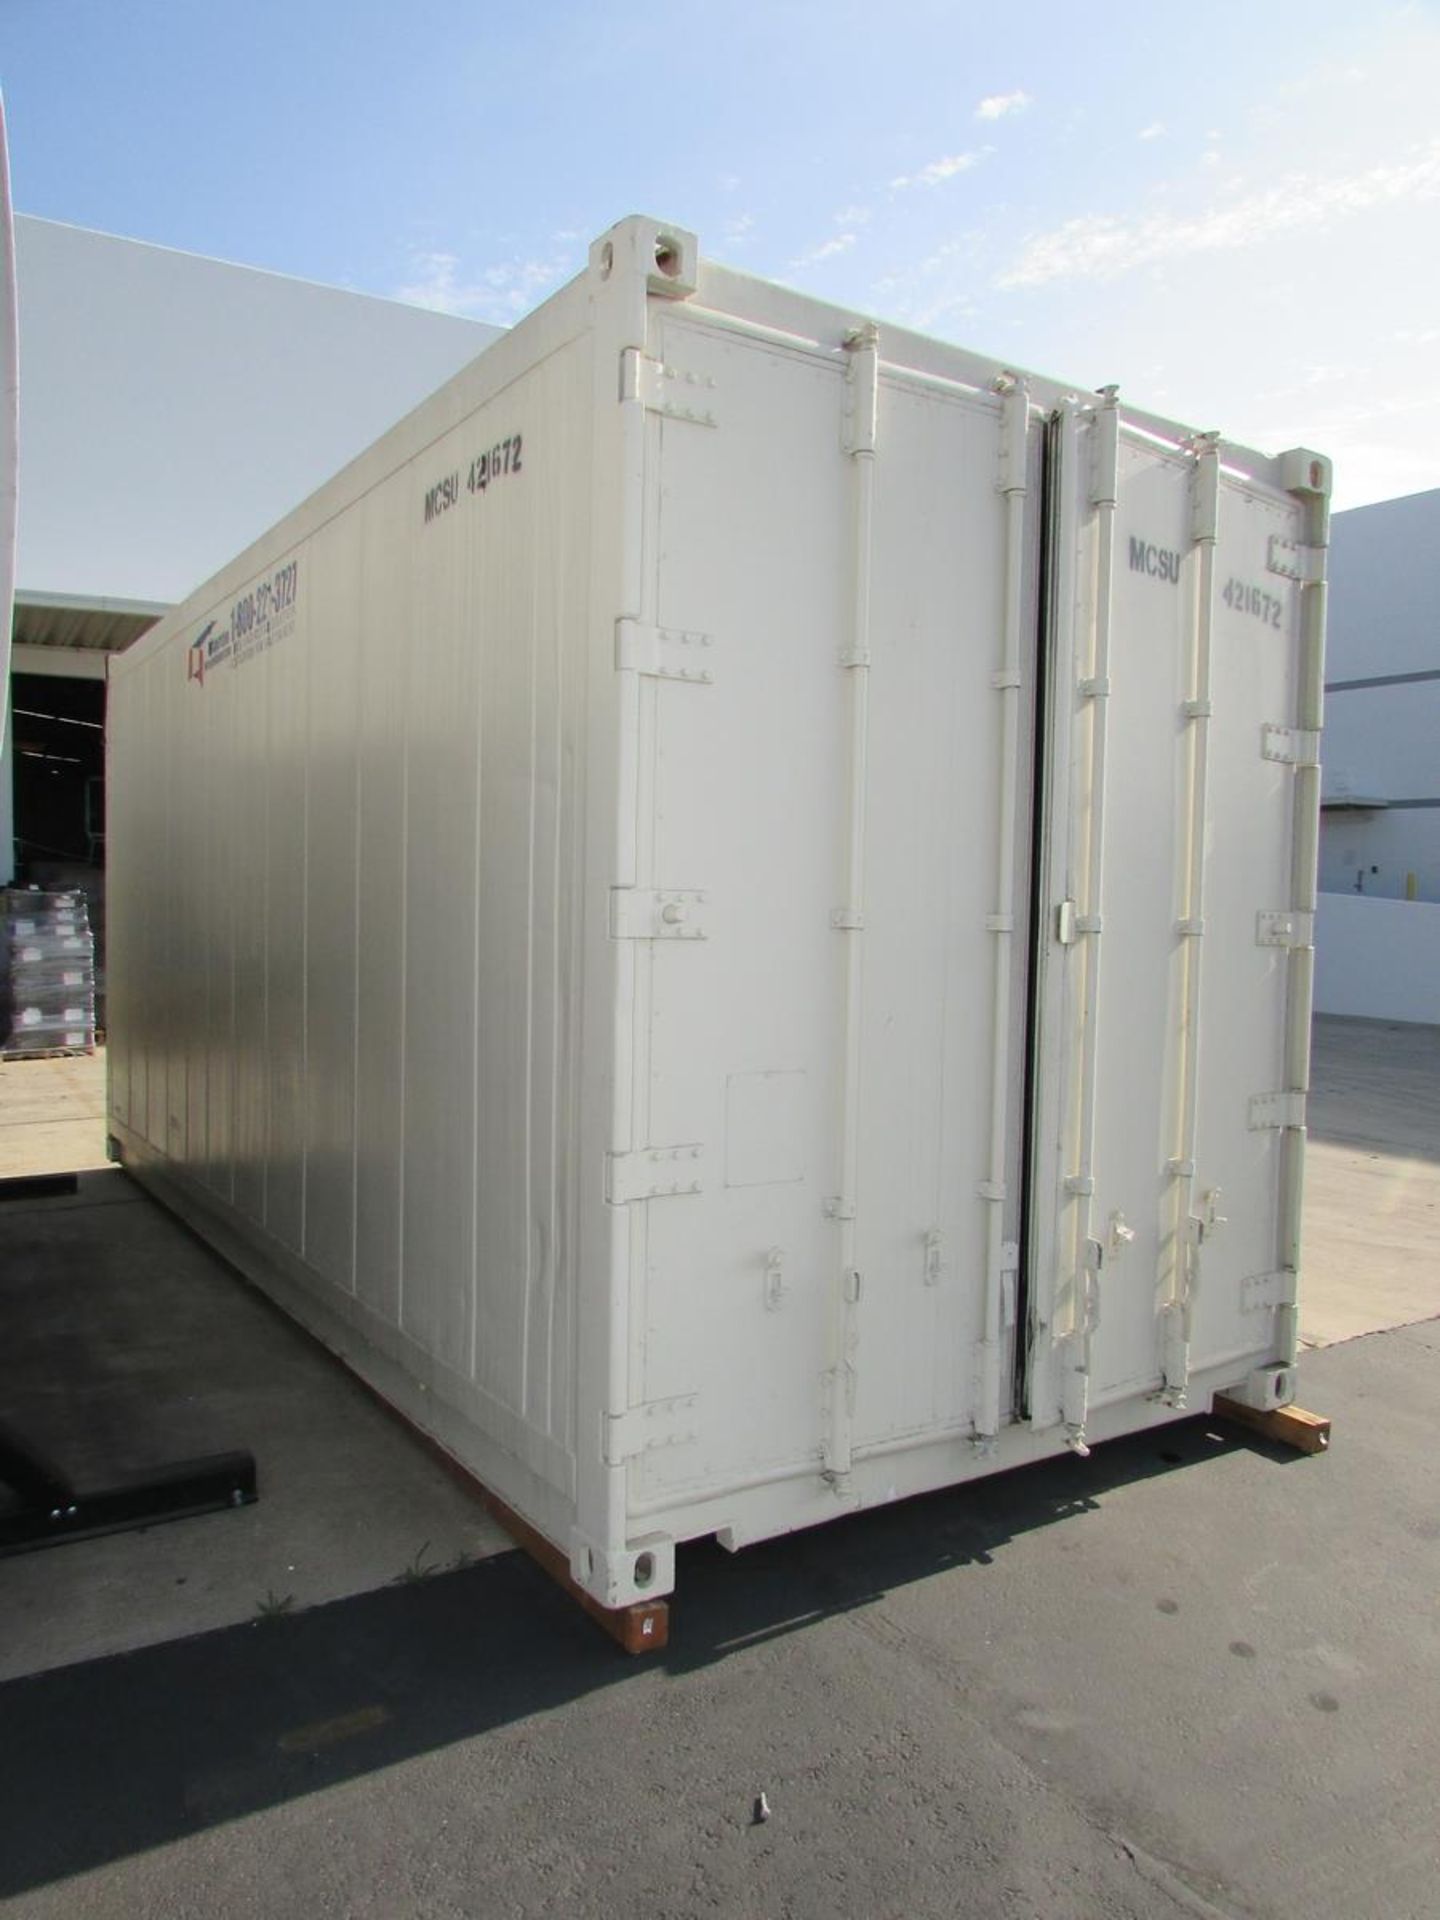 Martin 20' Dry Refrigerated Shipping Container (2006) - Image 17 of 22